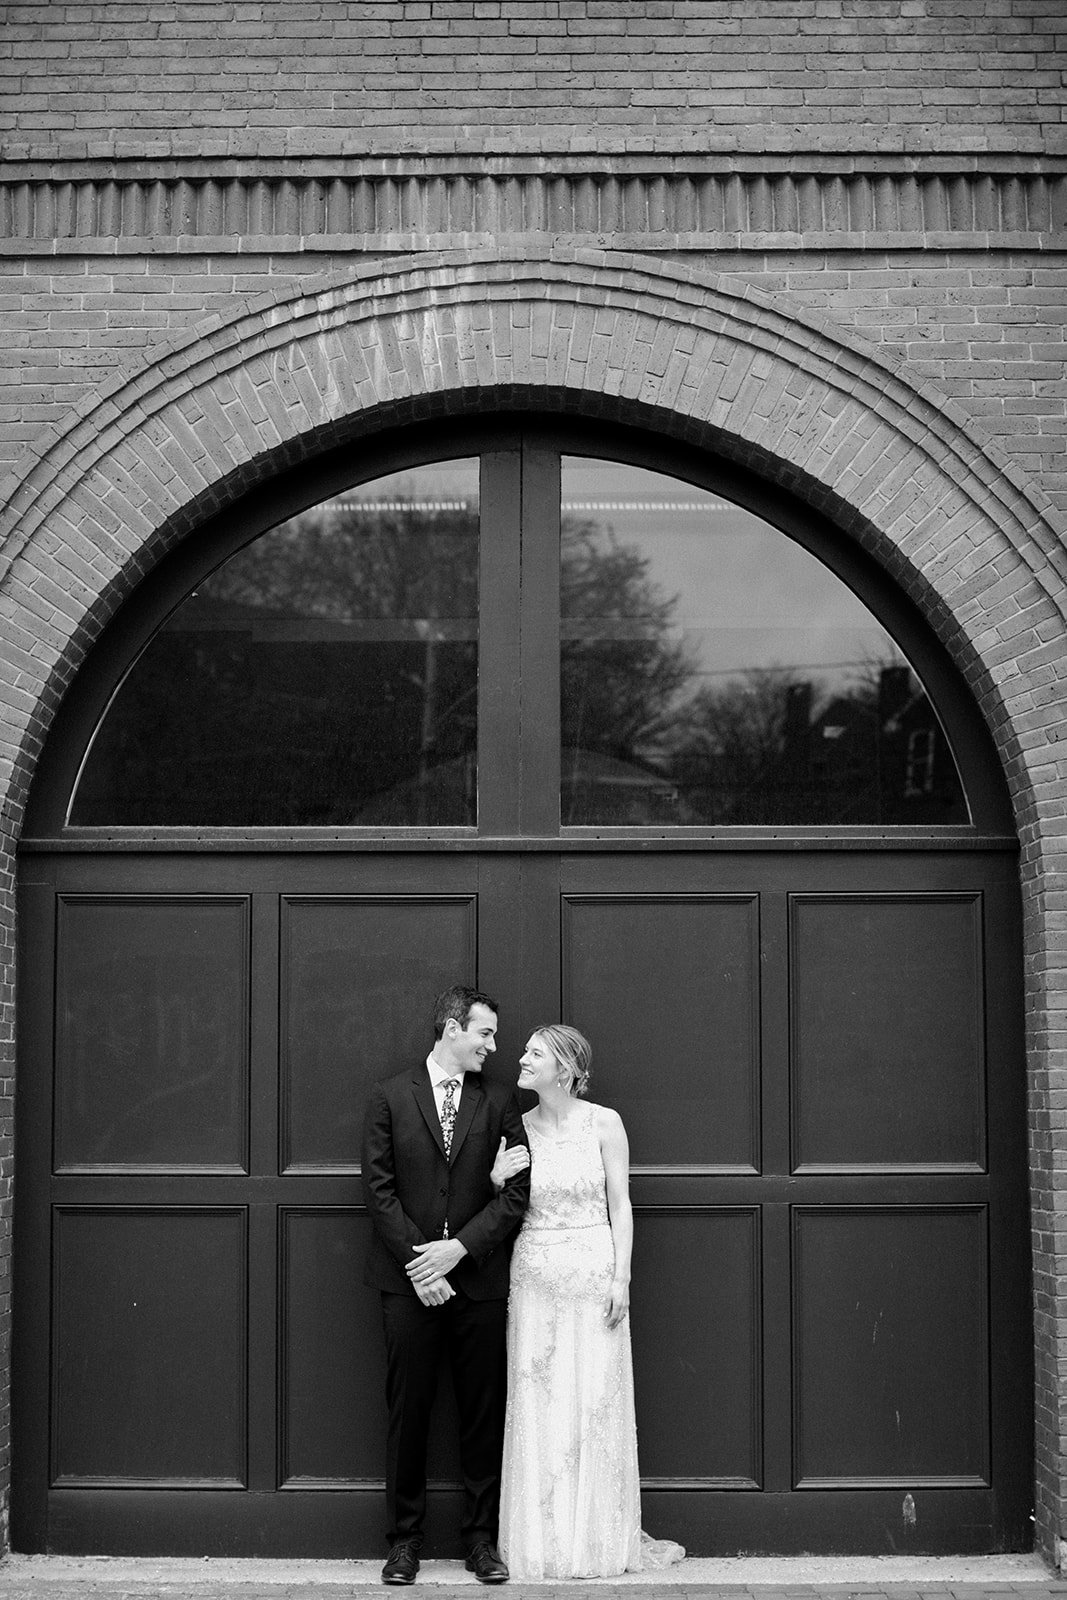 A bride and groom on their wedding day in Portland, Maine